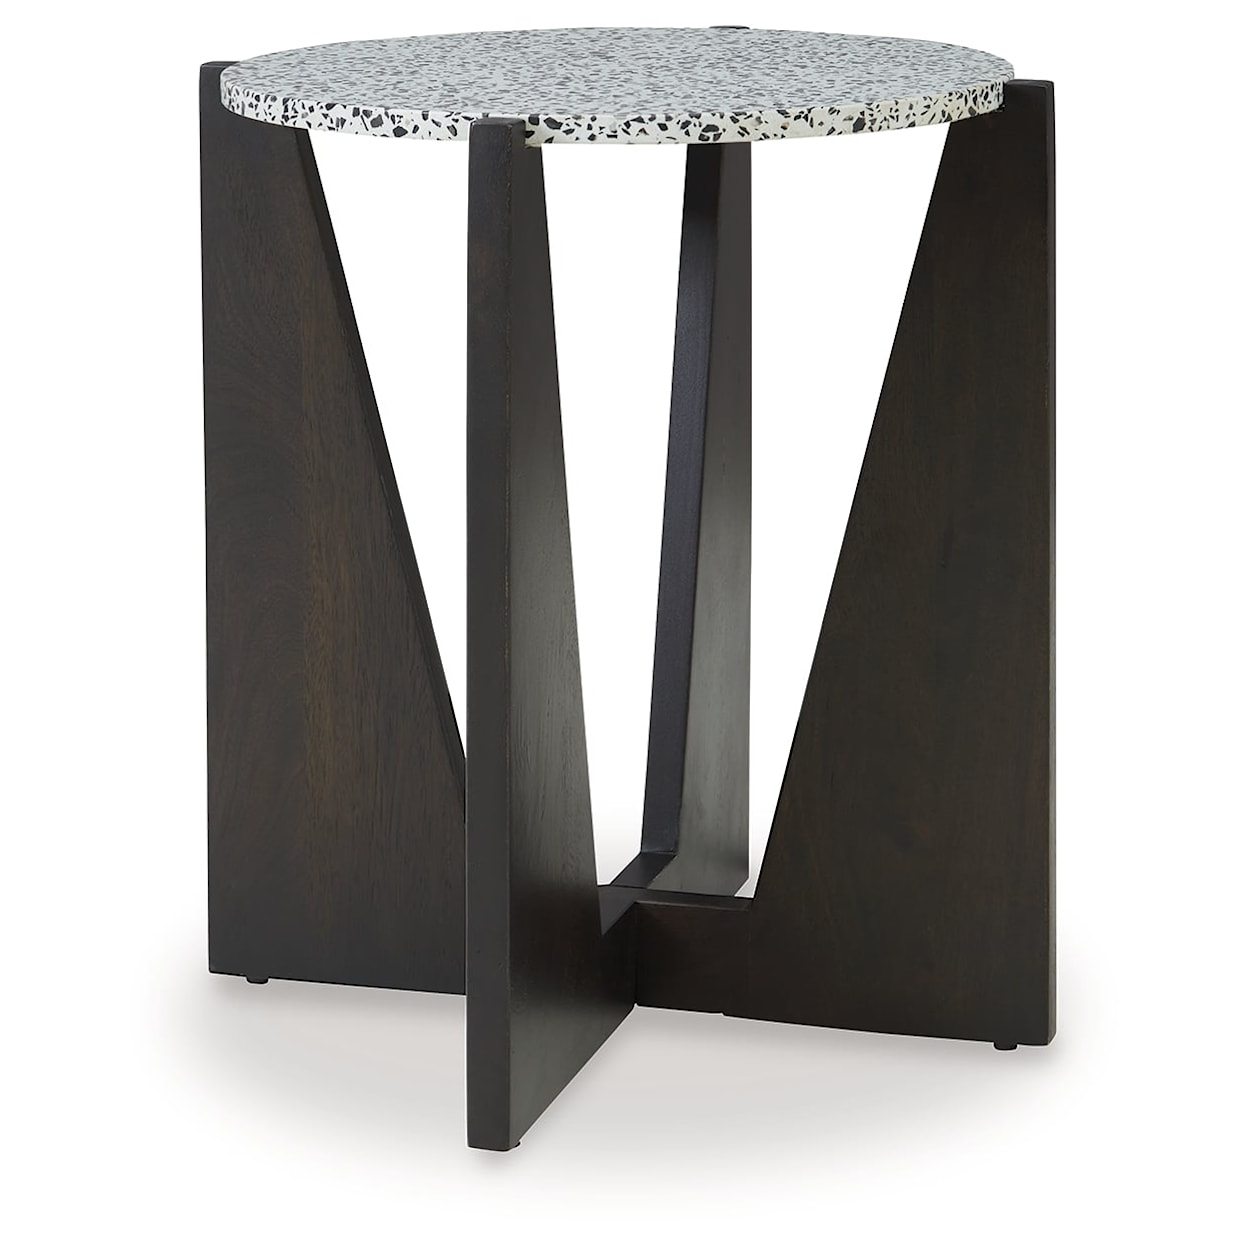 Signature Design by Ashley Tellrich Accent Table